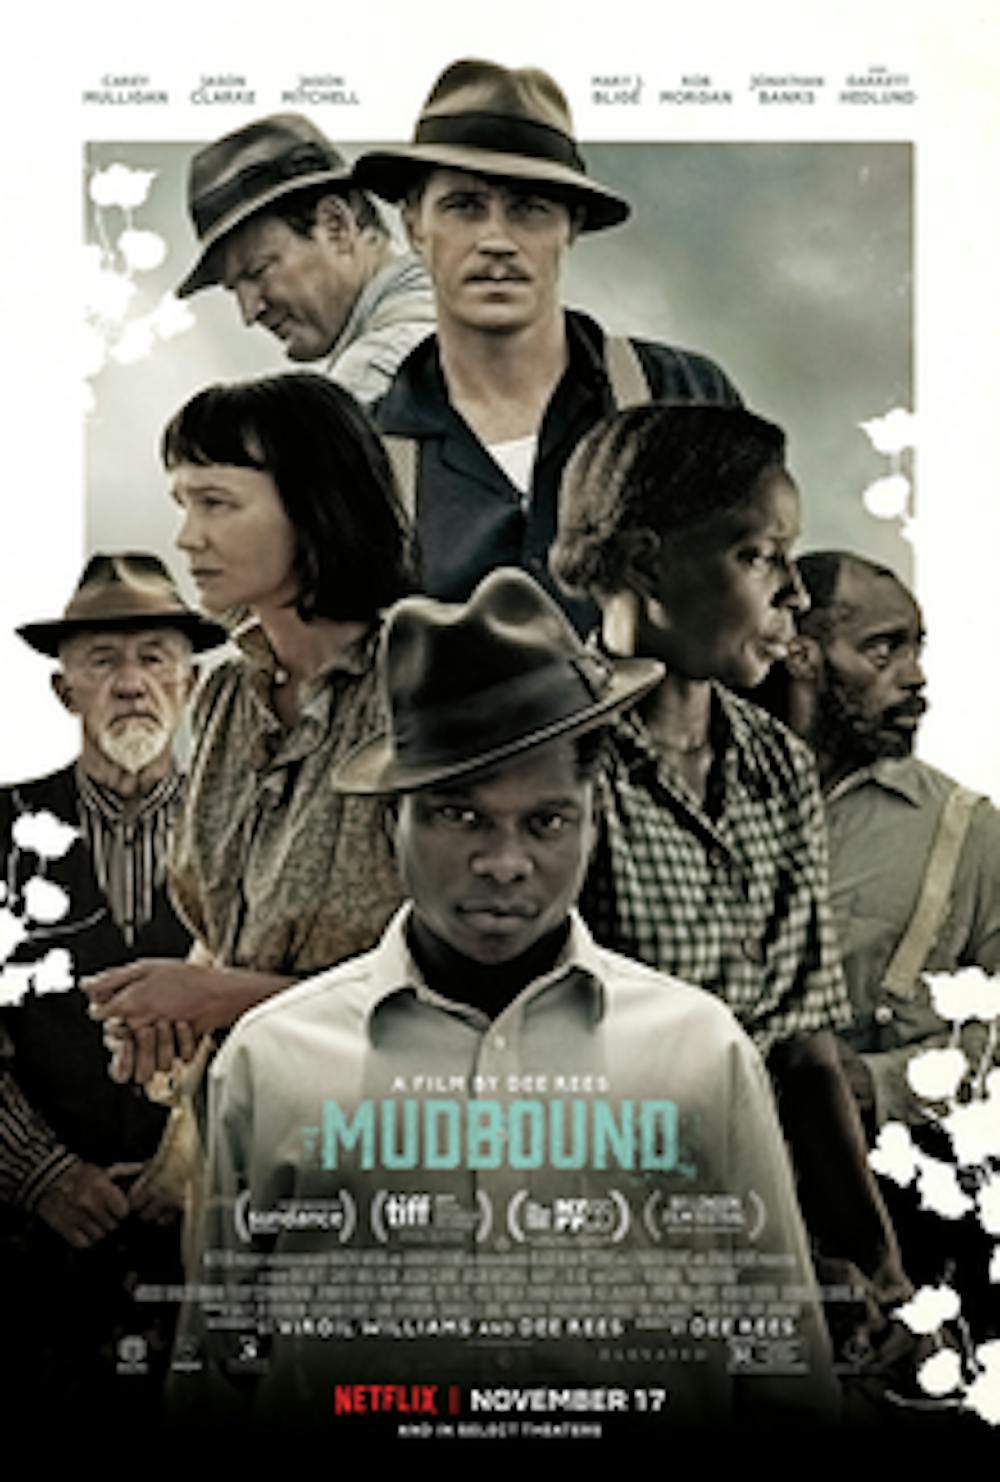 “Mudbound” tells the intertwining story of two families and their lives in the Deep South.